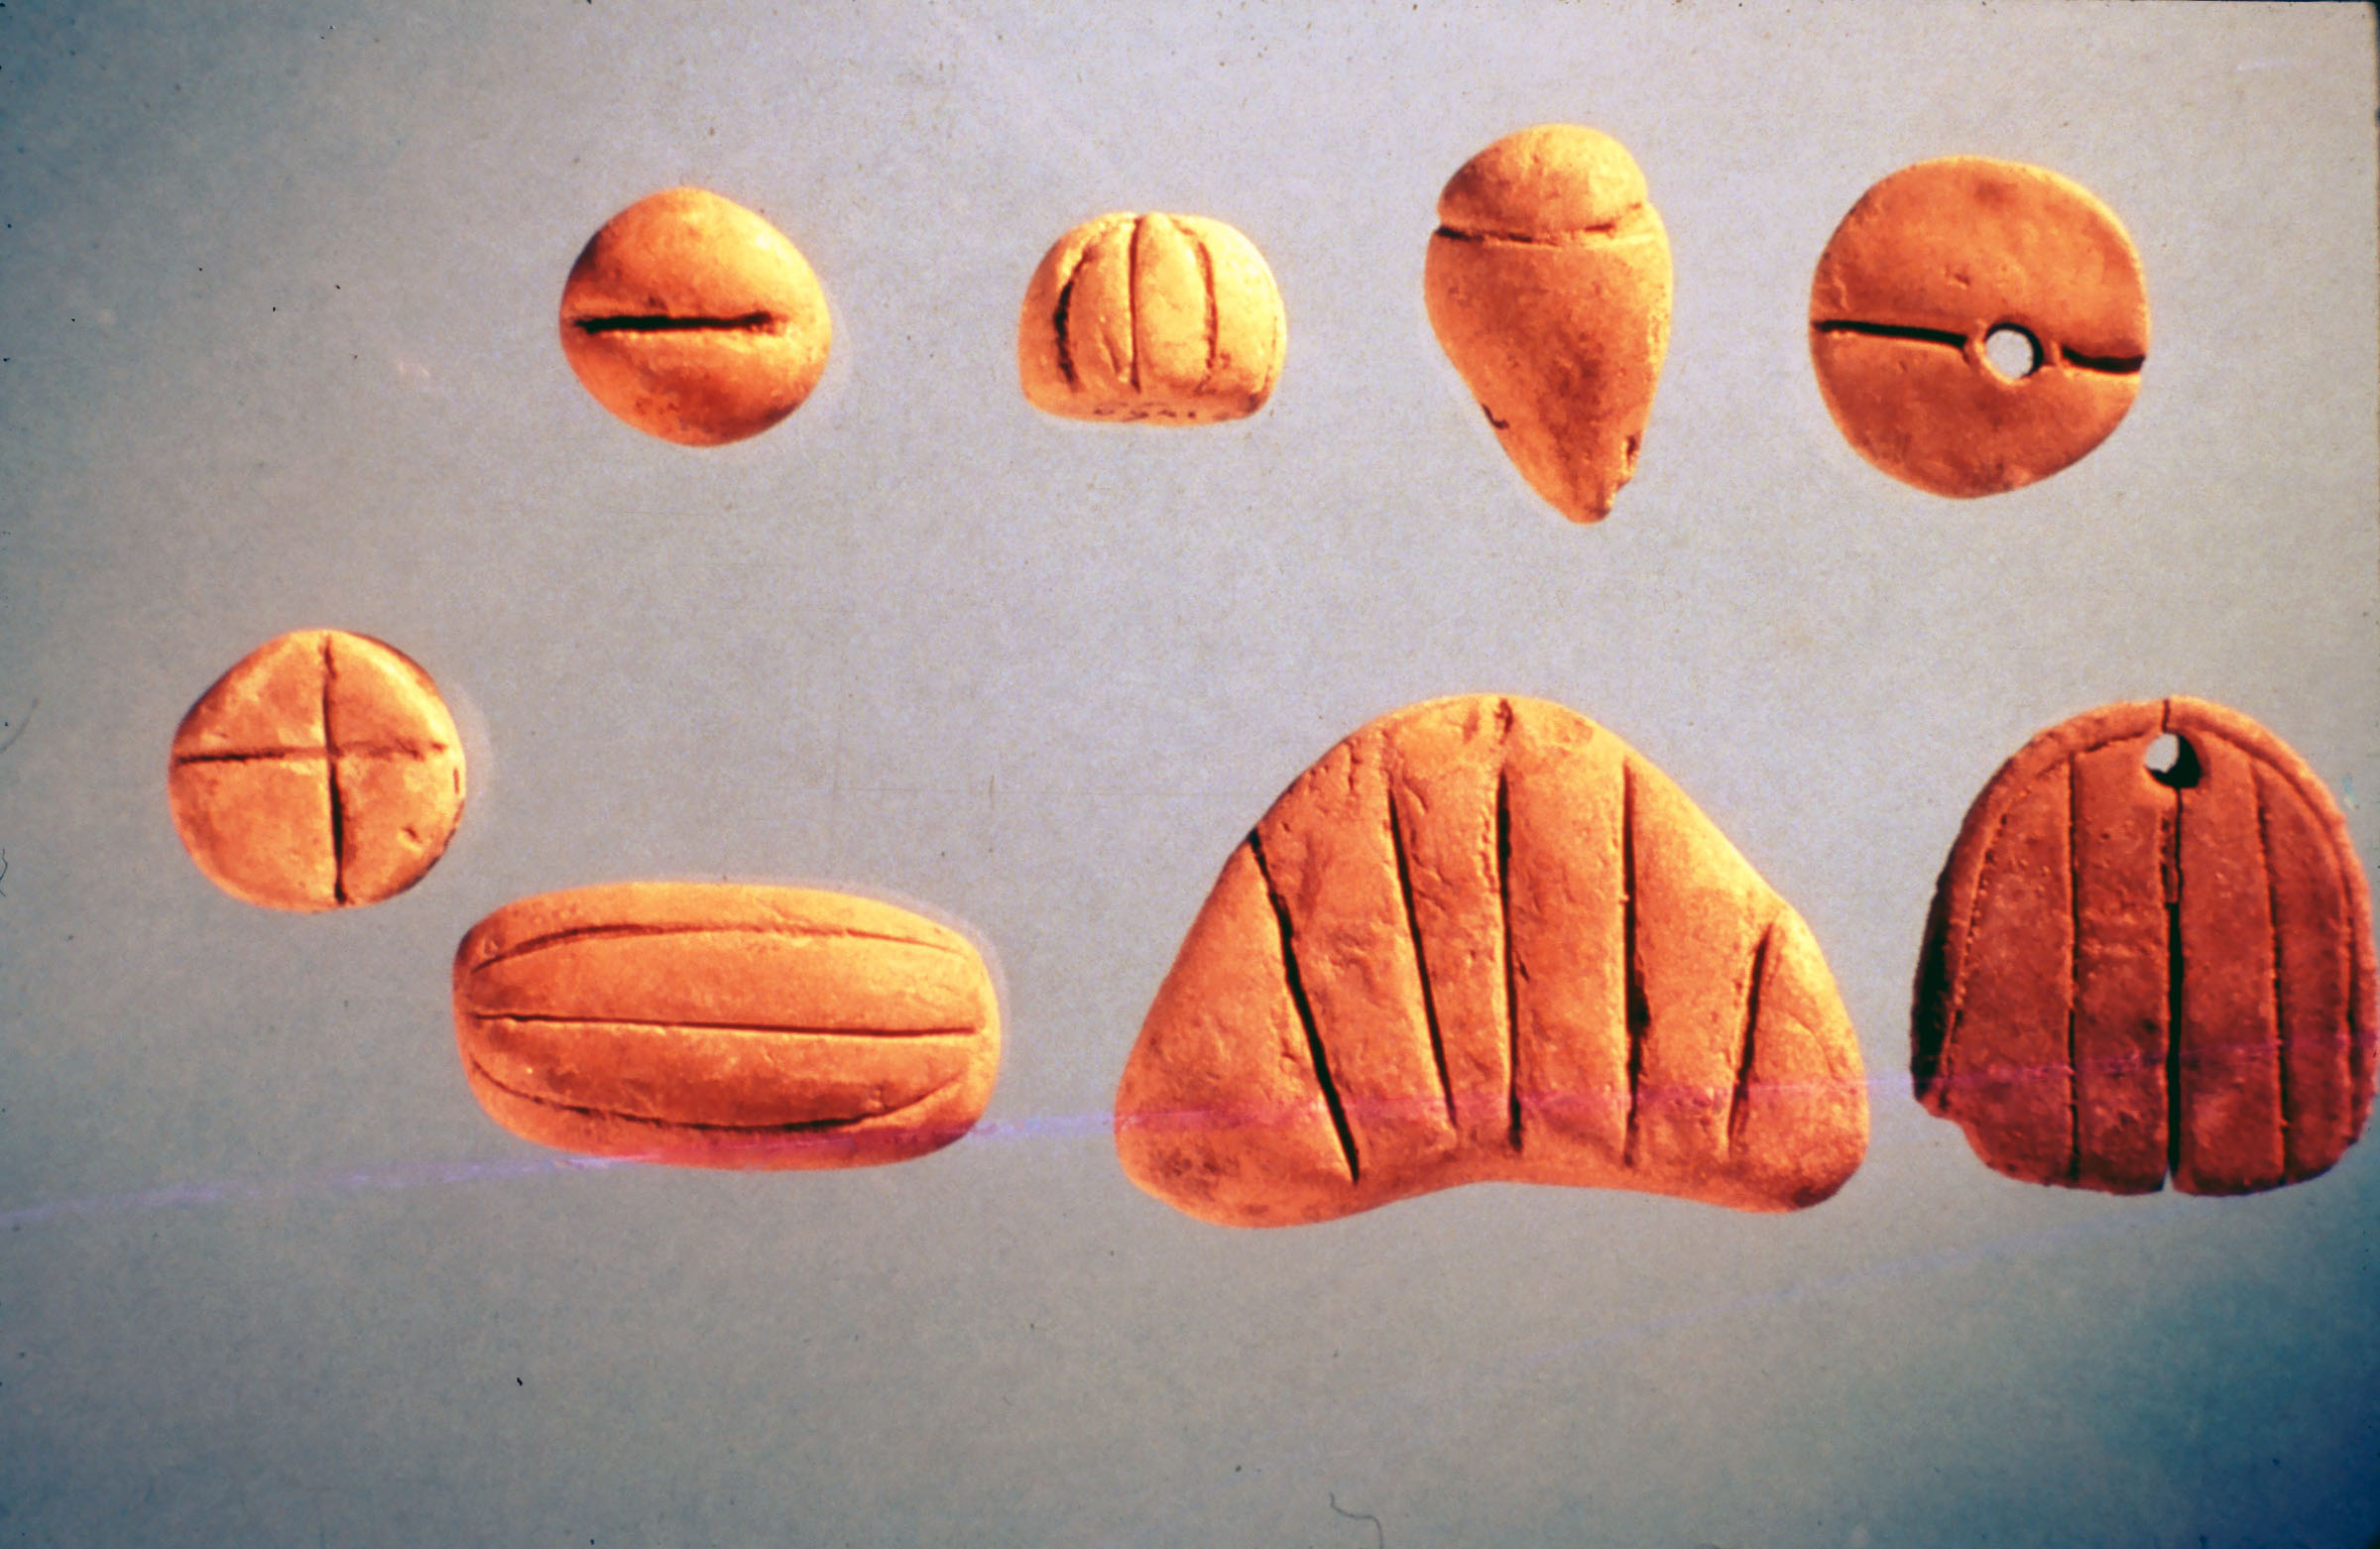 Figure 2. Incised counting tokens